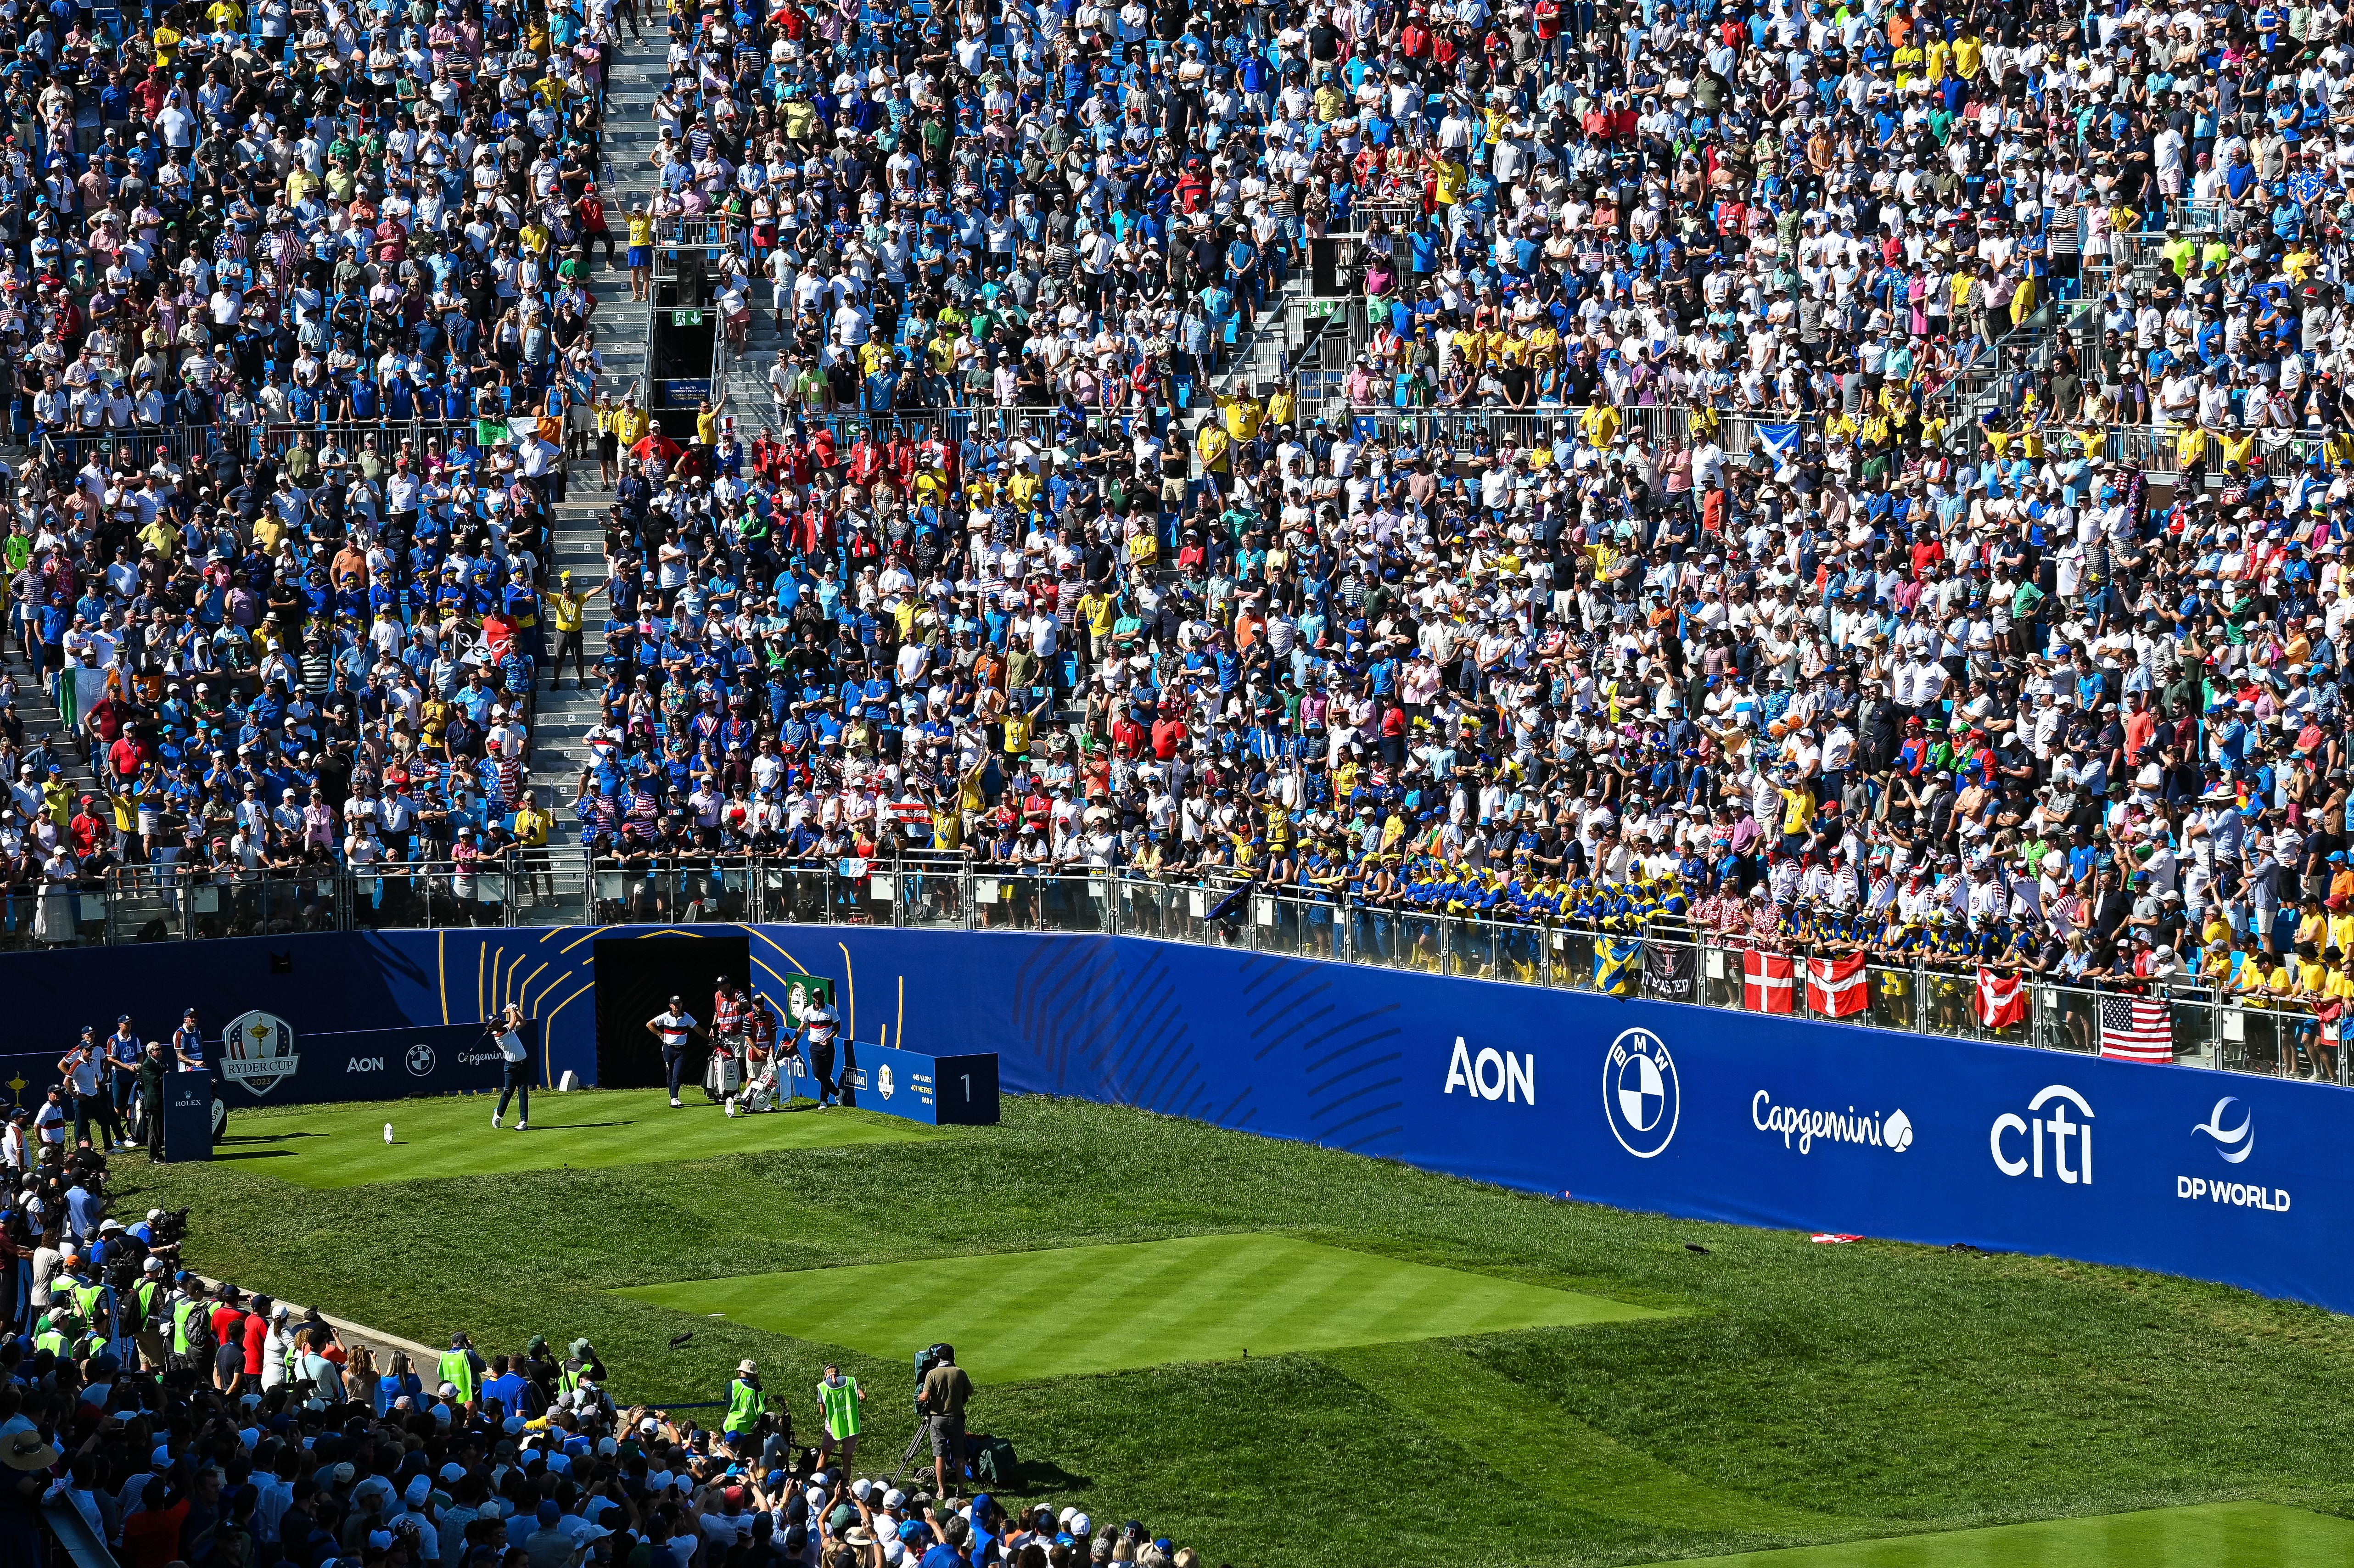 Putting AI into the Ryder Cup